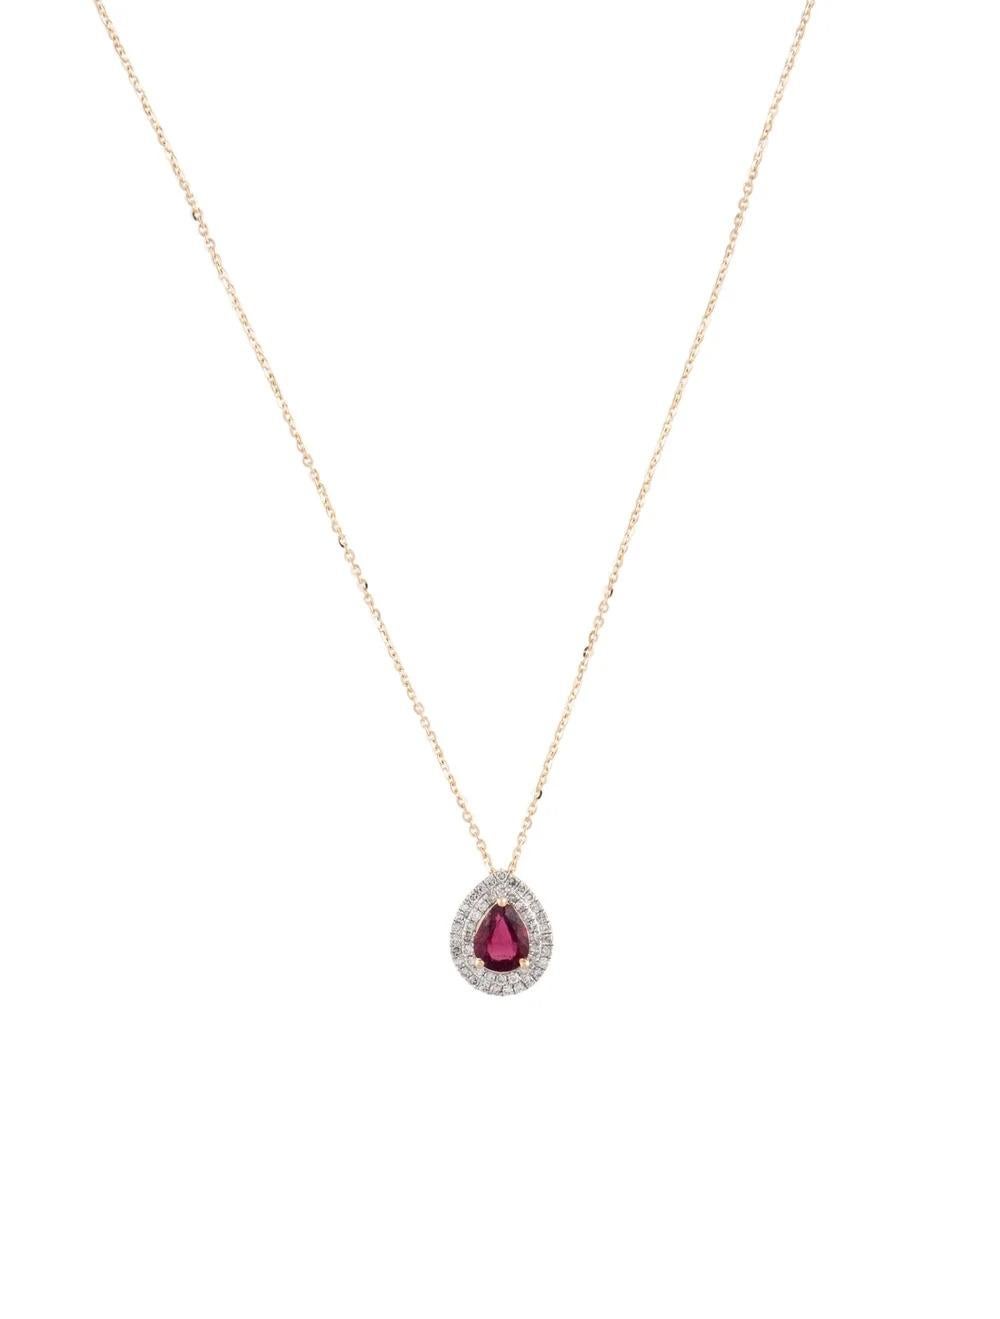 Experience timeless elegance with this exquisite 14K Yellow Gold Pendant Necklace featuring a stunning Pear Modified Brilliant Rubellite. Perfect for adding a pop of vibrant color to any ensemble, this necklace exudes sophistication and charm. Here